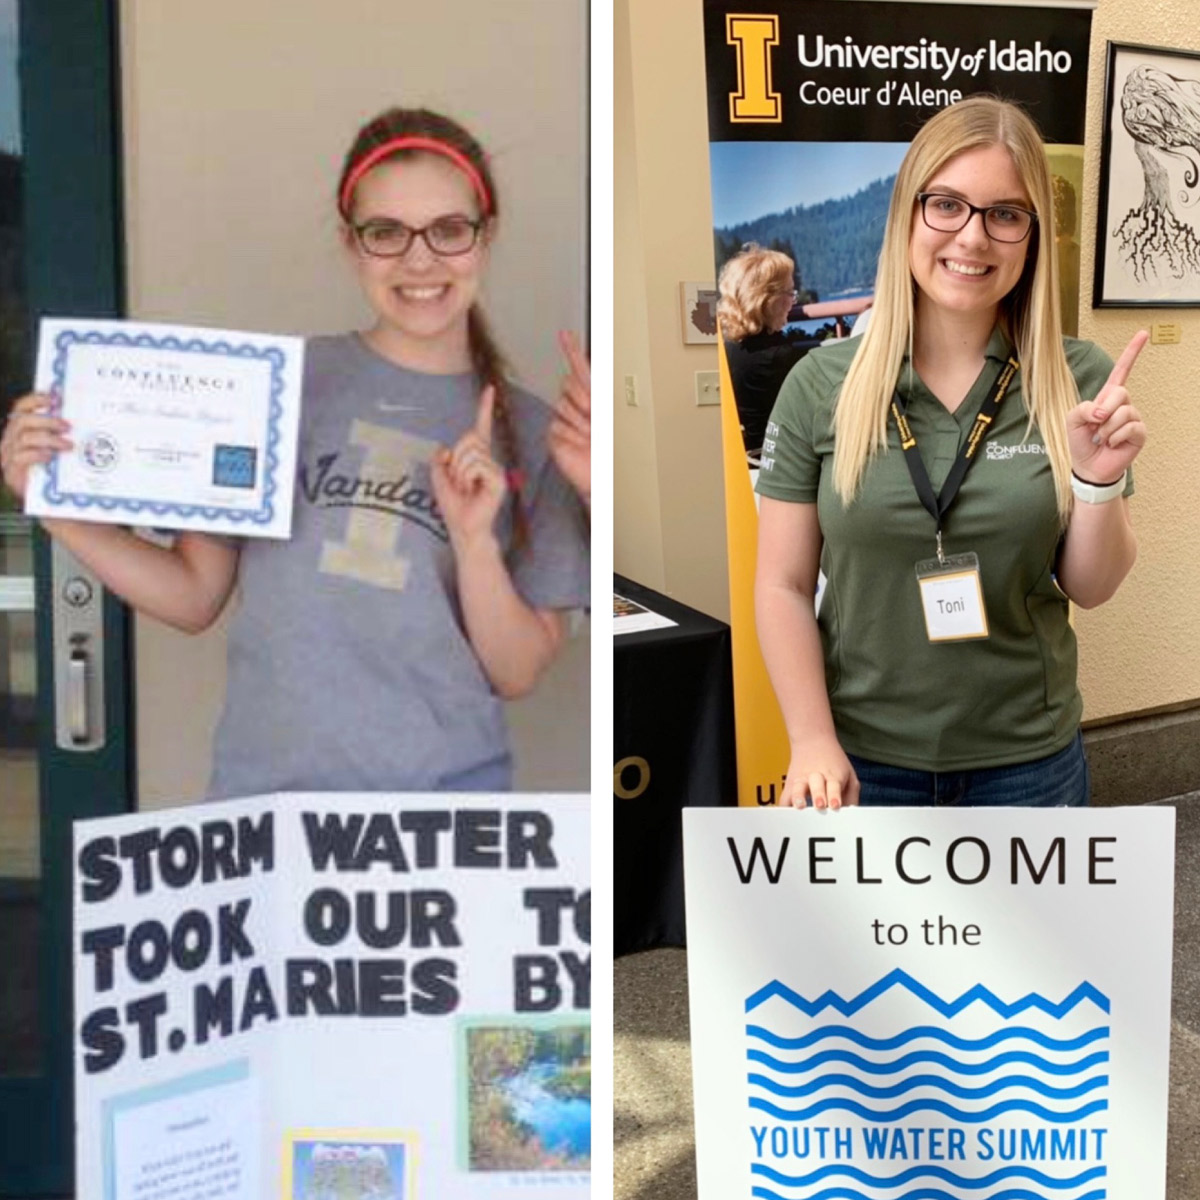 A collage of two images: Toni Eells with her first place certificate in the 2015 Youth Water Summit, and Toni Eells as a conference inter in 2019.